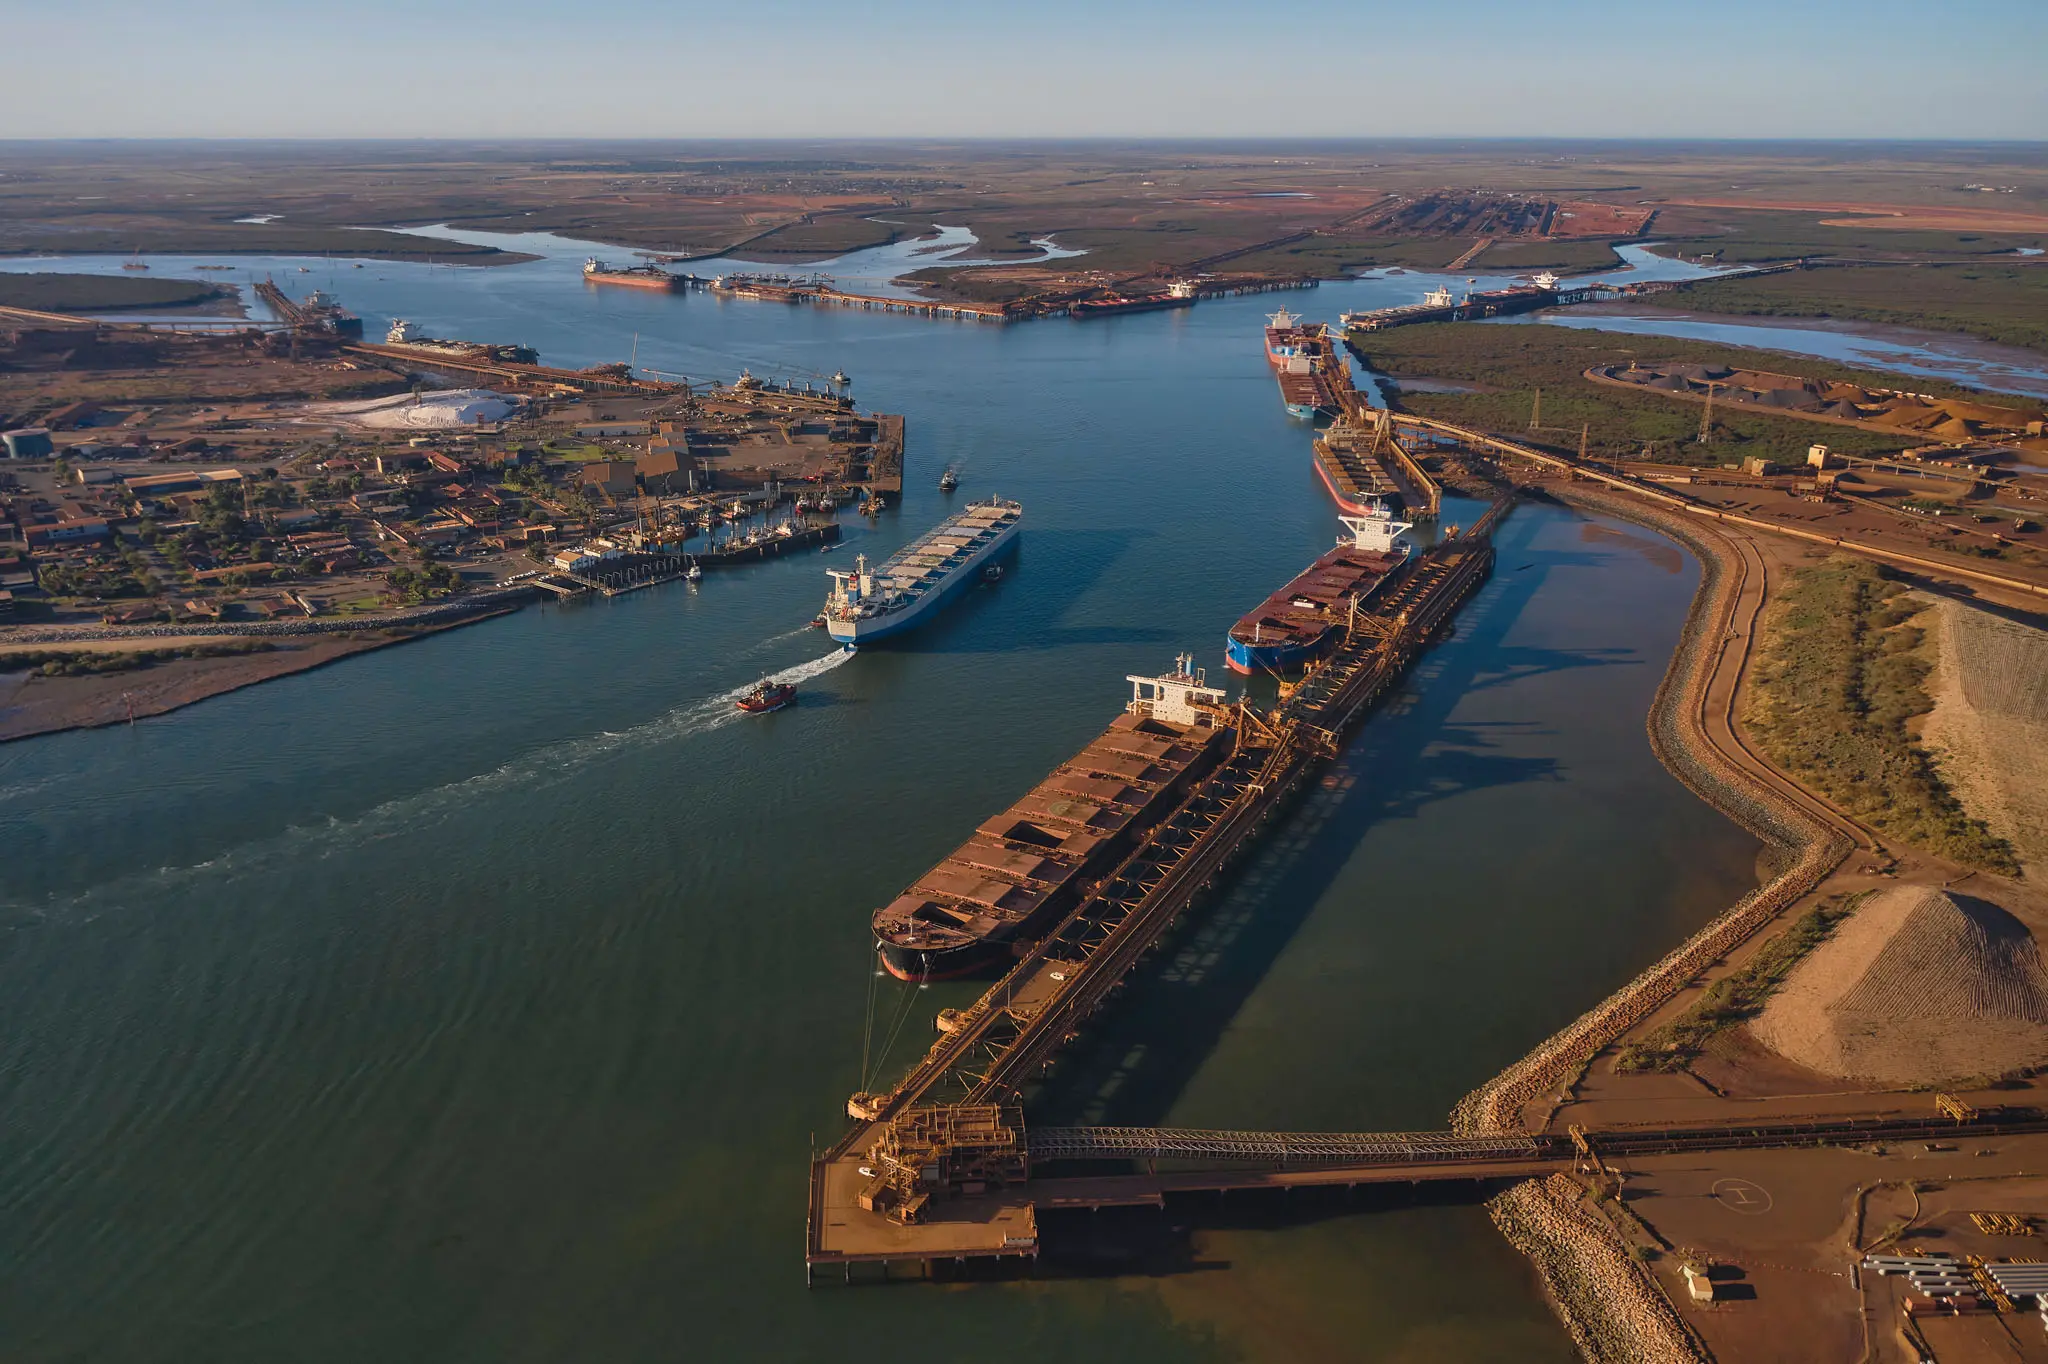 Aerial view of Port Hedland shipping port